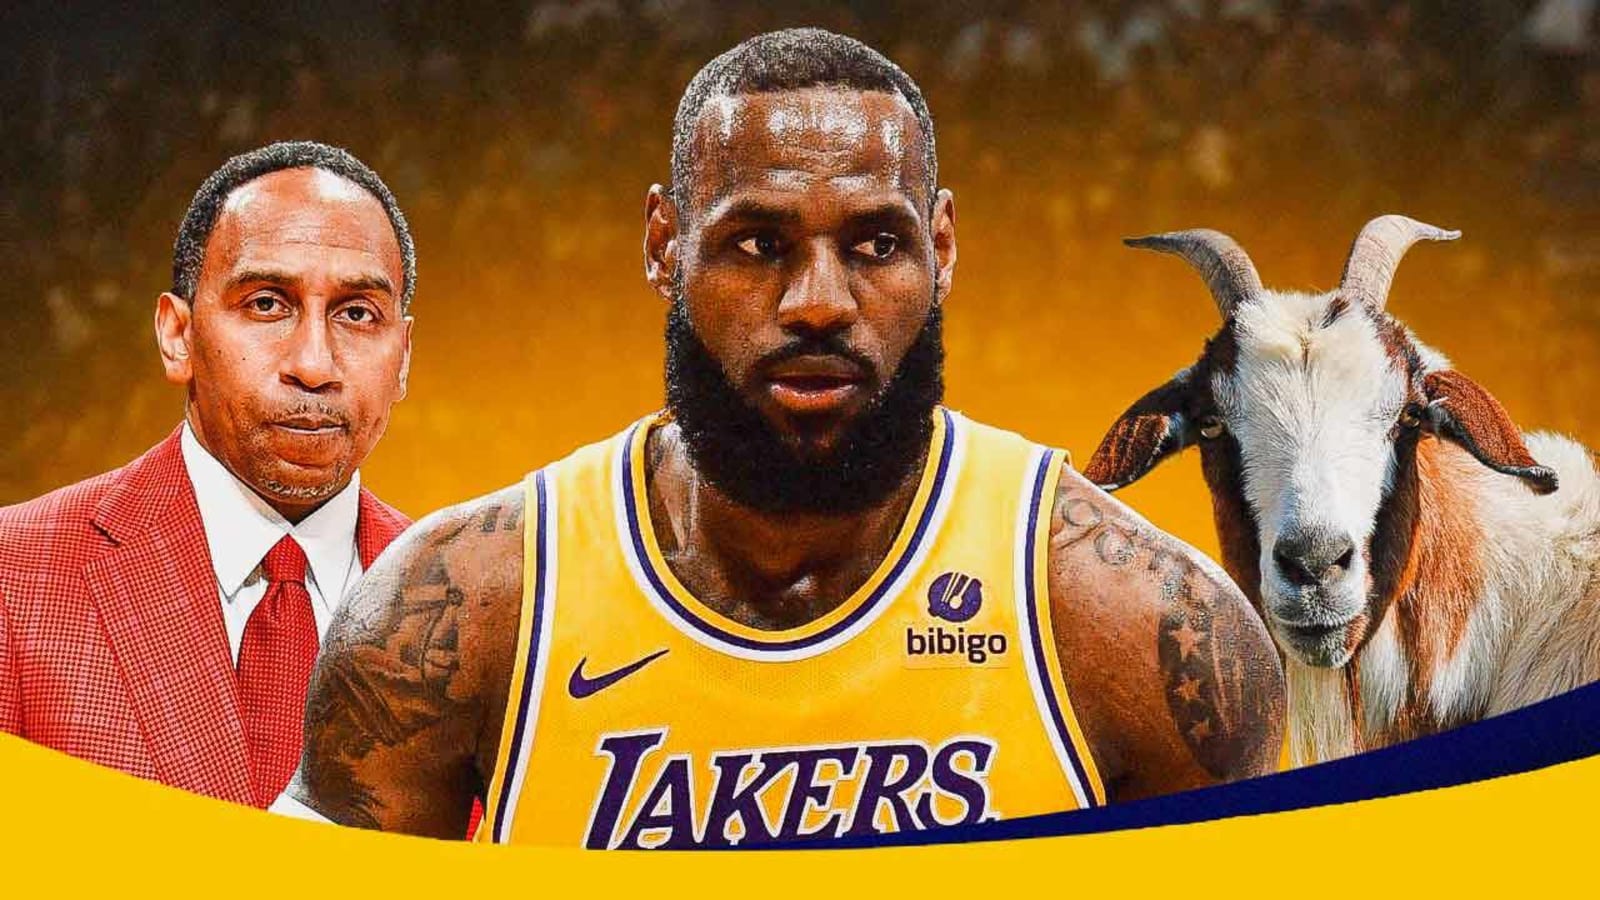 Stephen A. Smith rips Lakers star LeBron James’ GOAT status amid massive coaching turnover